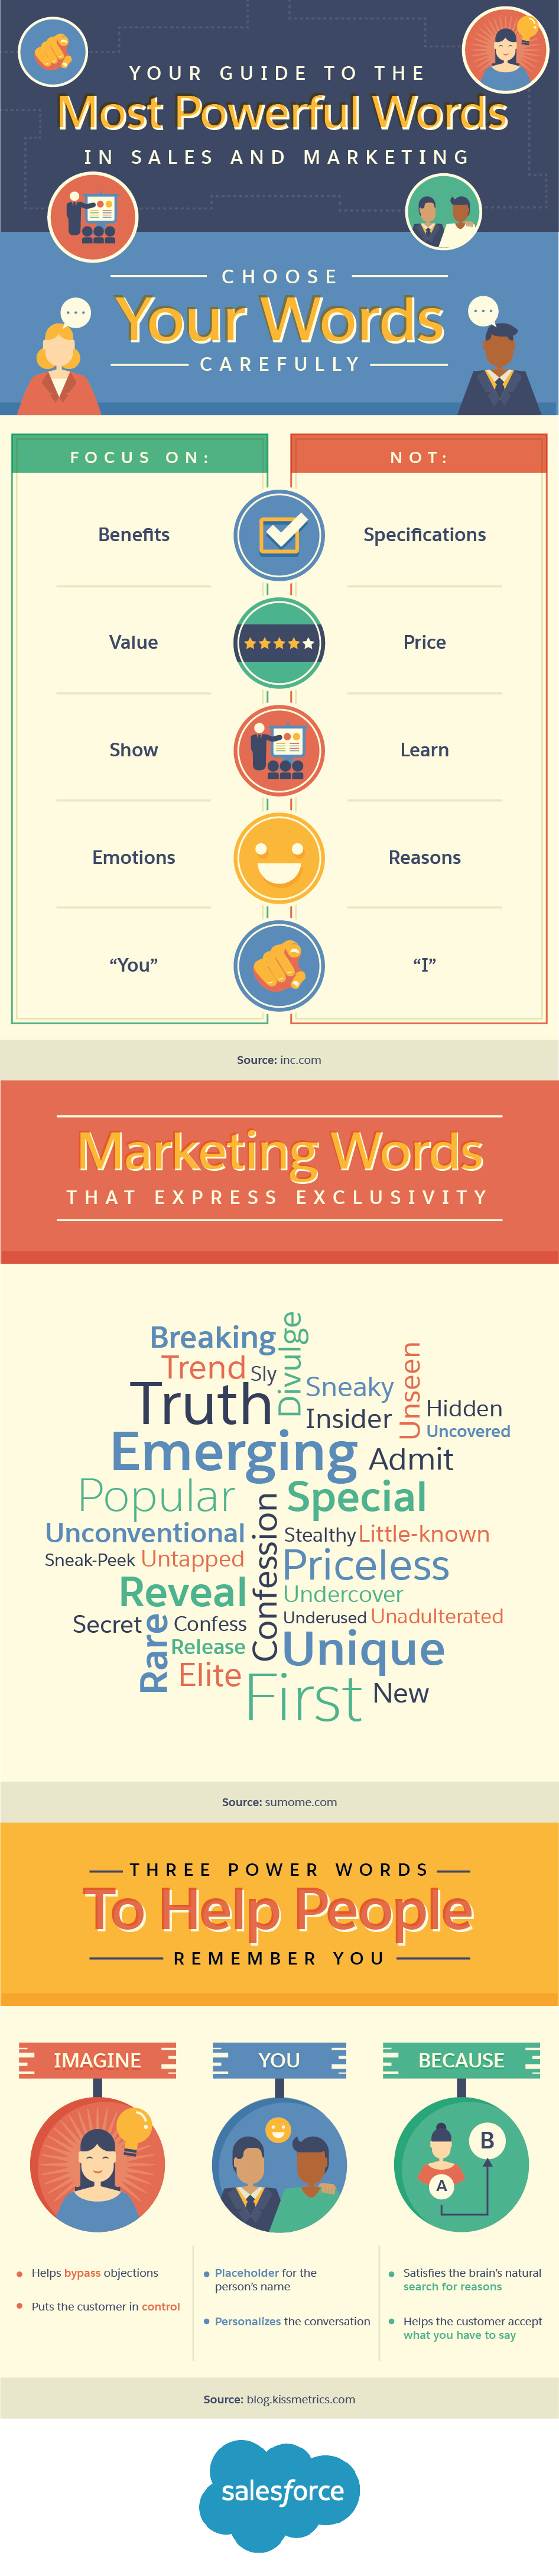 Your Guide to the Most Powerful Words in Sales and Marketing